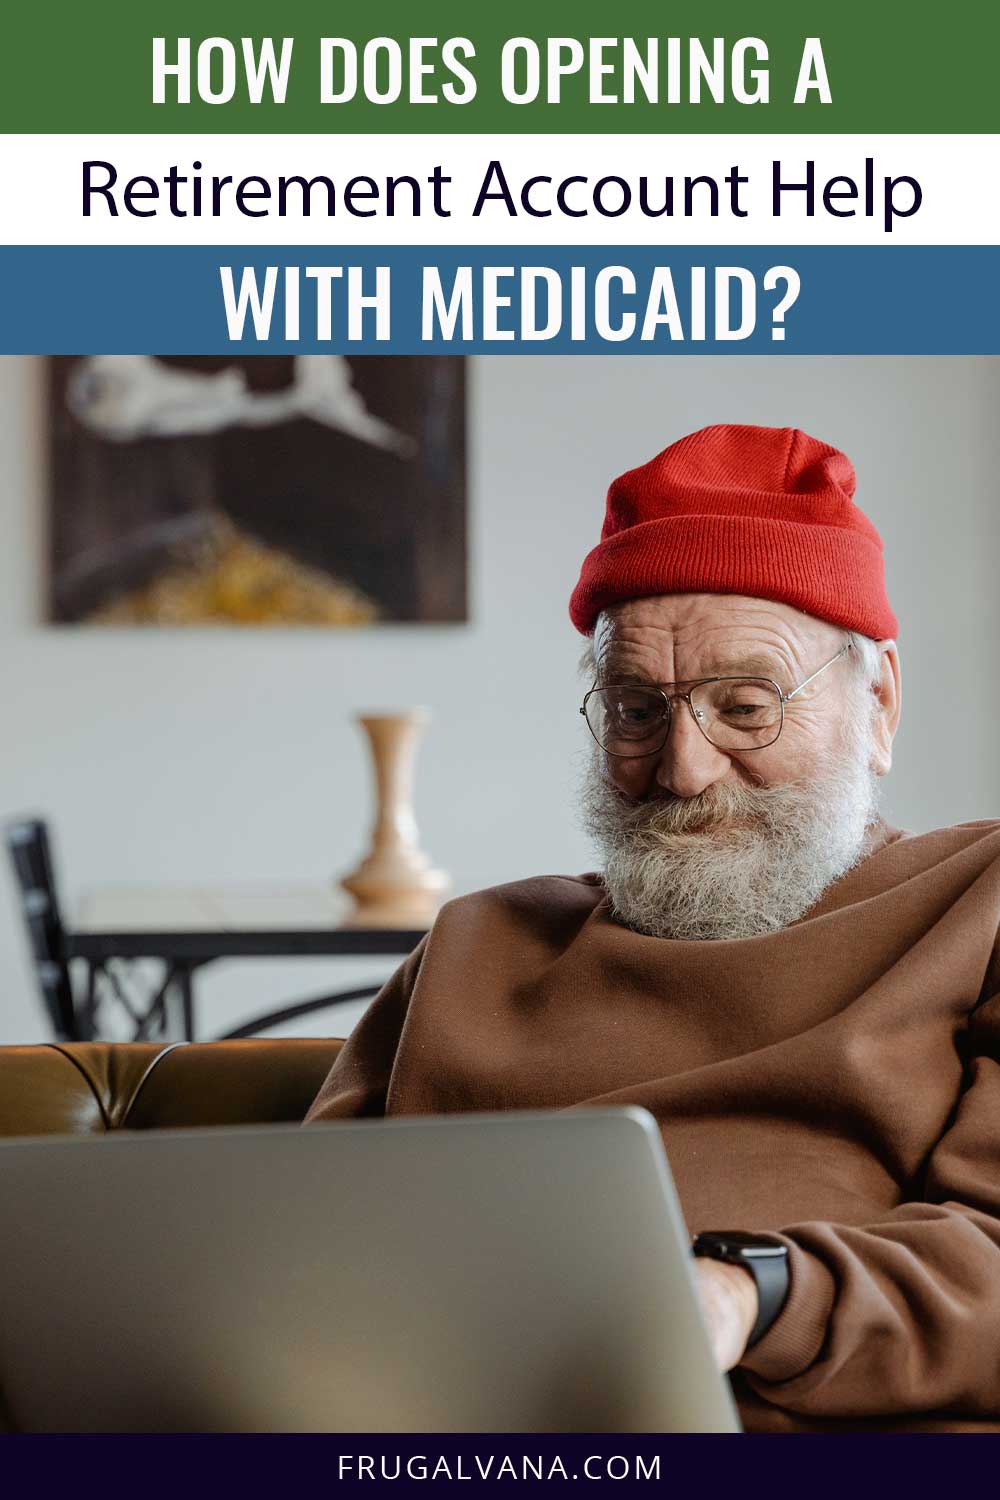 How Does Opening a Retirement Account Help With Medicaid?